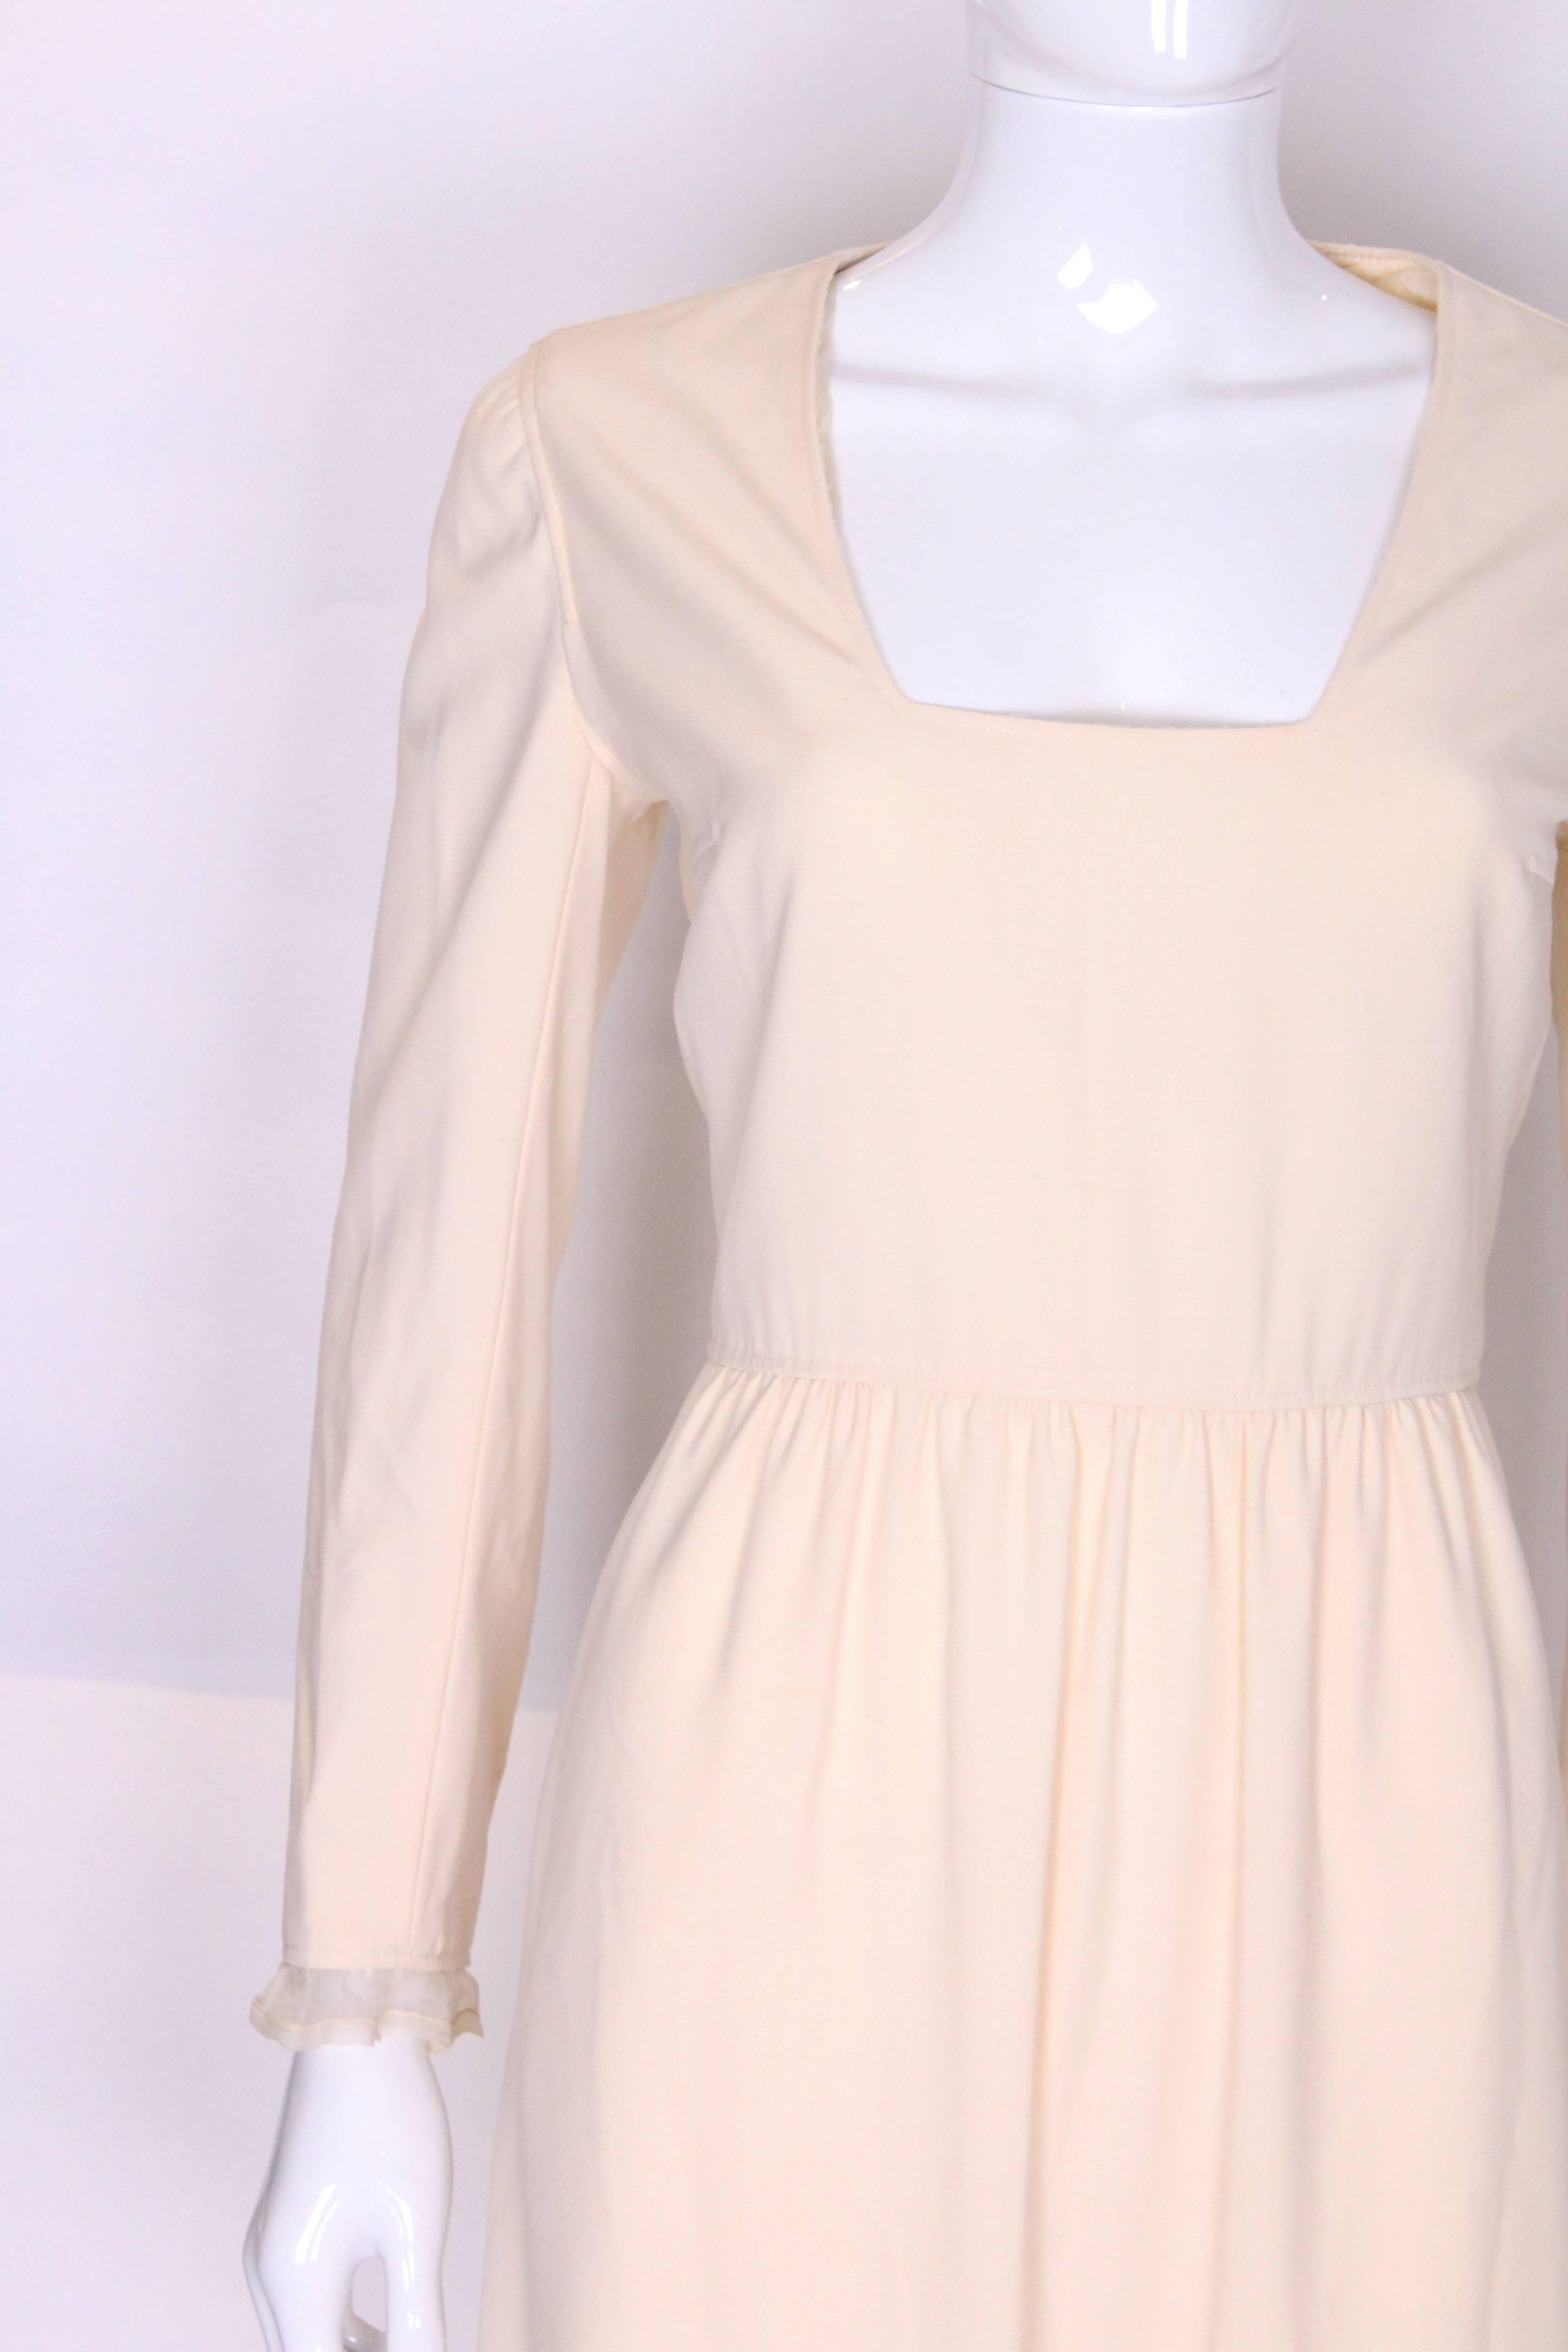 A vintage 1960s Courreges cream Wool and Silk Dress Model 29074 In Excellent Condition For Sale In London, GB